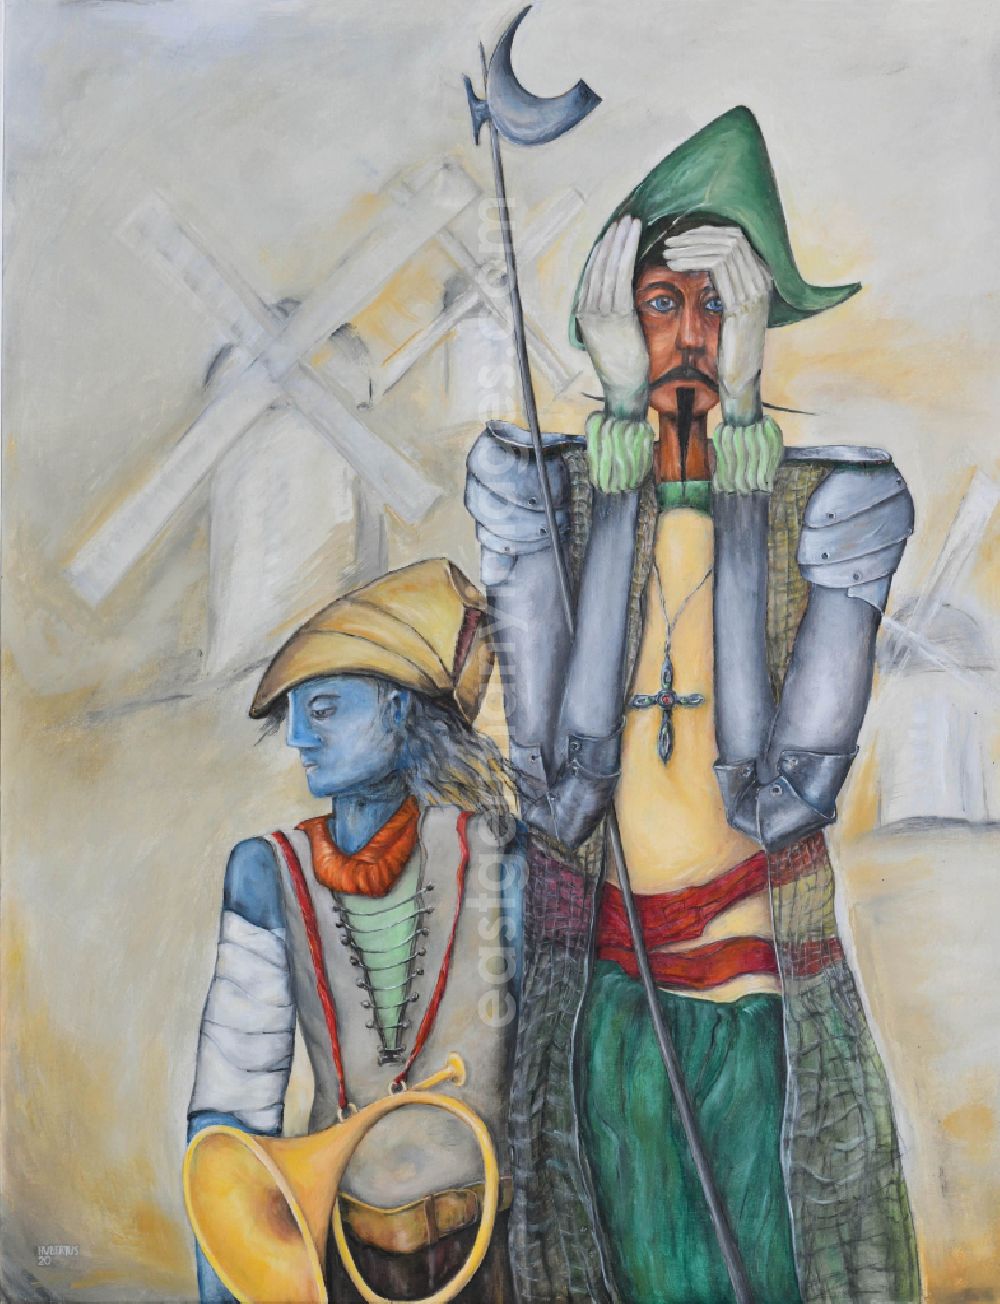 Berlin: Oil on canvas Don Quichotte by the artist Hubertus Gollnow